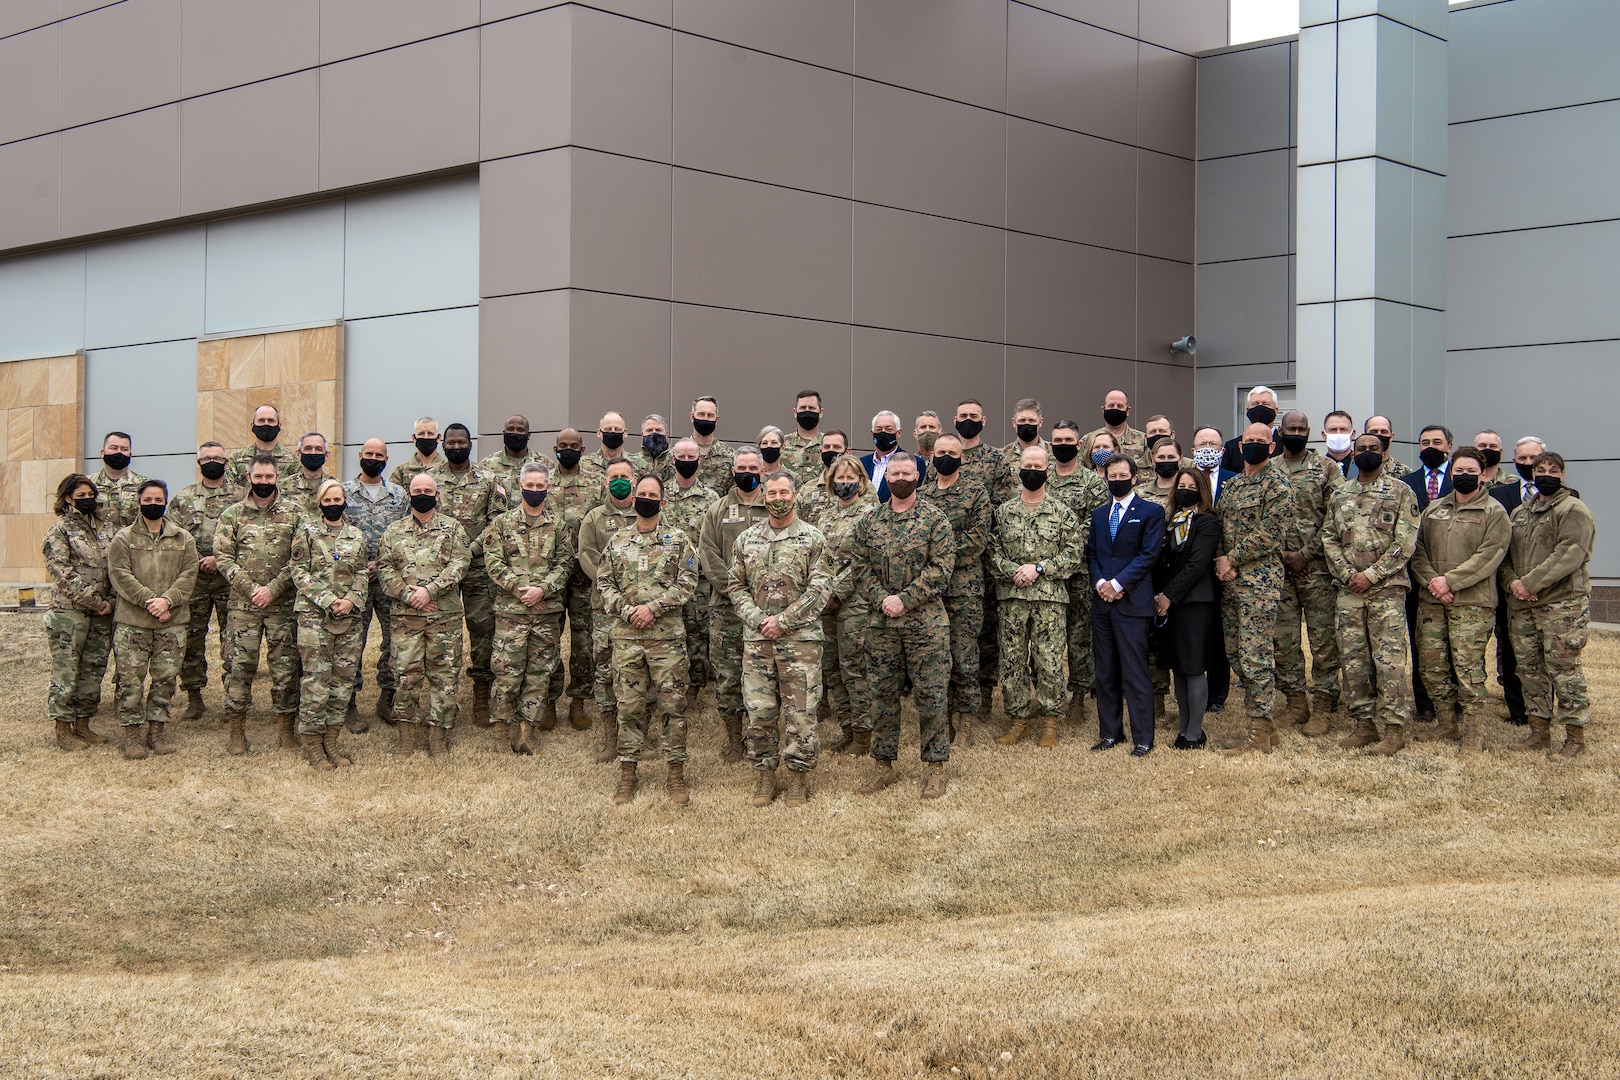 Senior officers gather for a group photo during the 2021 U.S. Space Command Commander's Conference on March 30 at Schriever Air Force Base, Colorado.